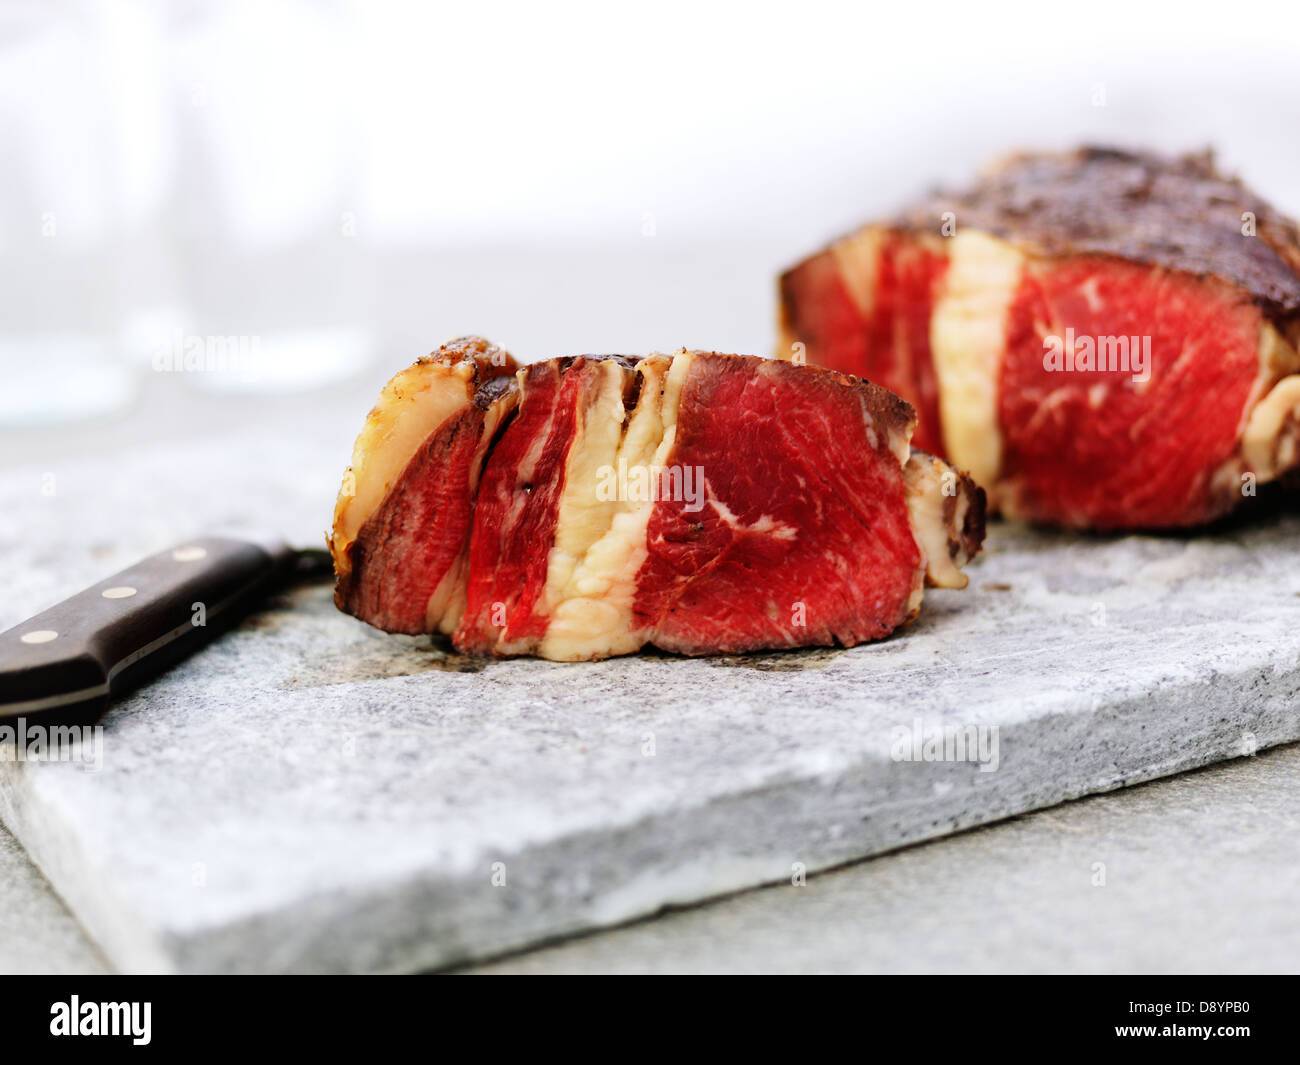 Close up of red meat slices on cutting board Stock Photo